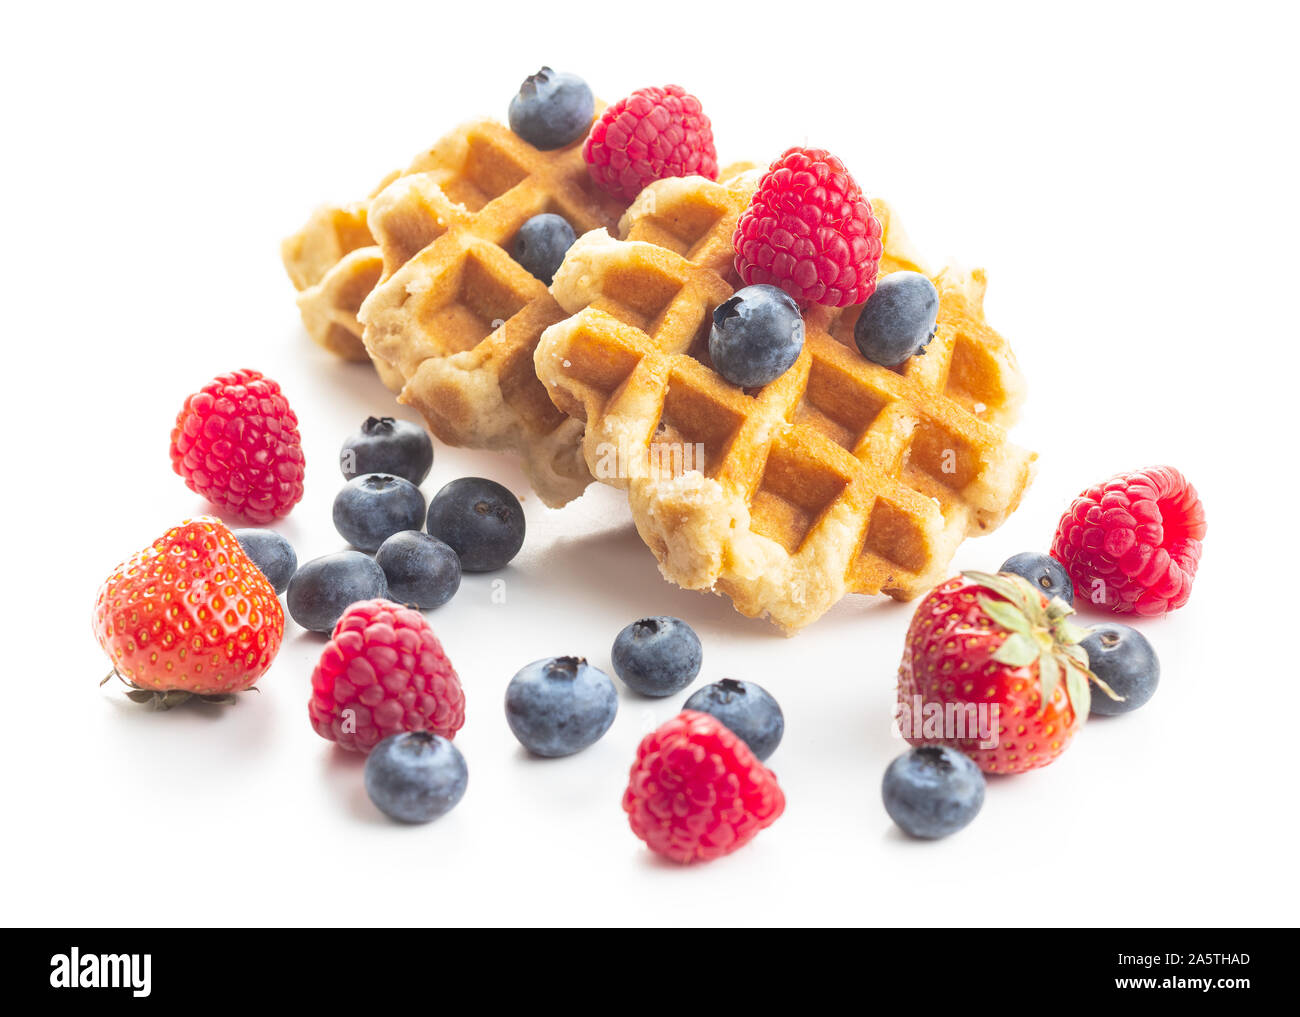 Waffles with blueberries and raspberries isolated on white background. Stock Photo